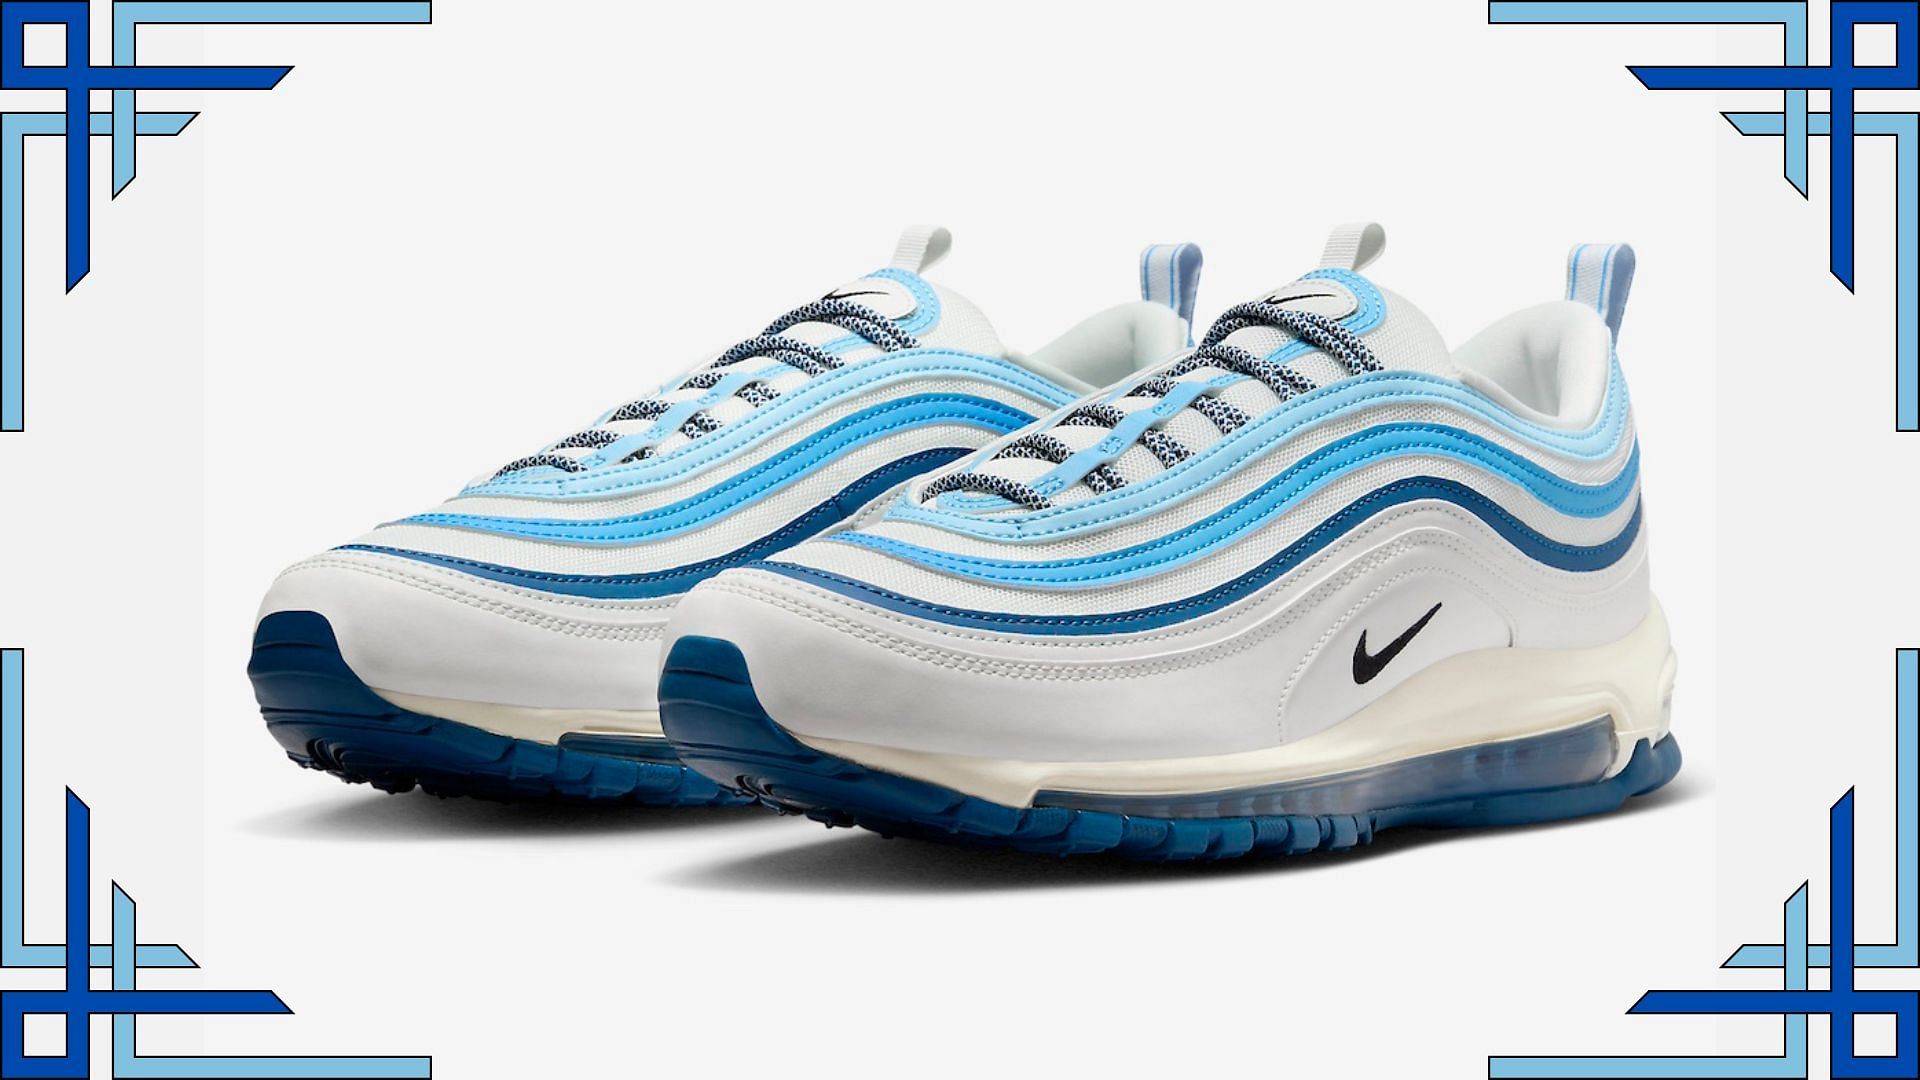 Nike Air Max 97 Glacier Blue sneakers (Image via YouTube/@sneakersociety)